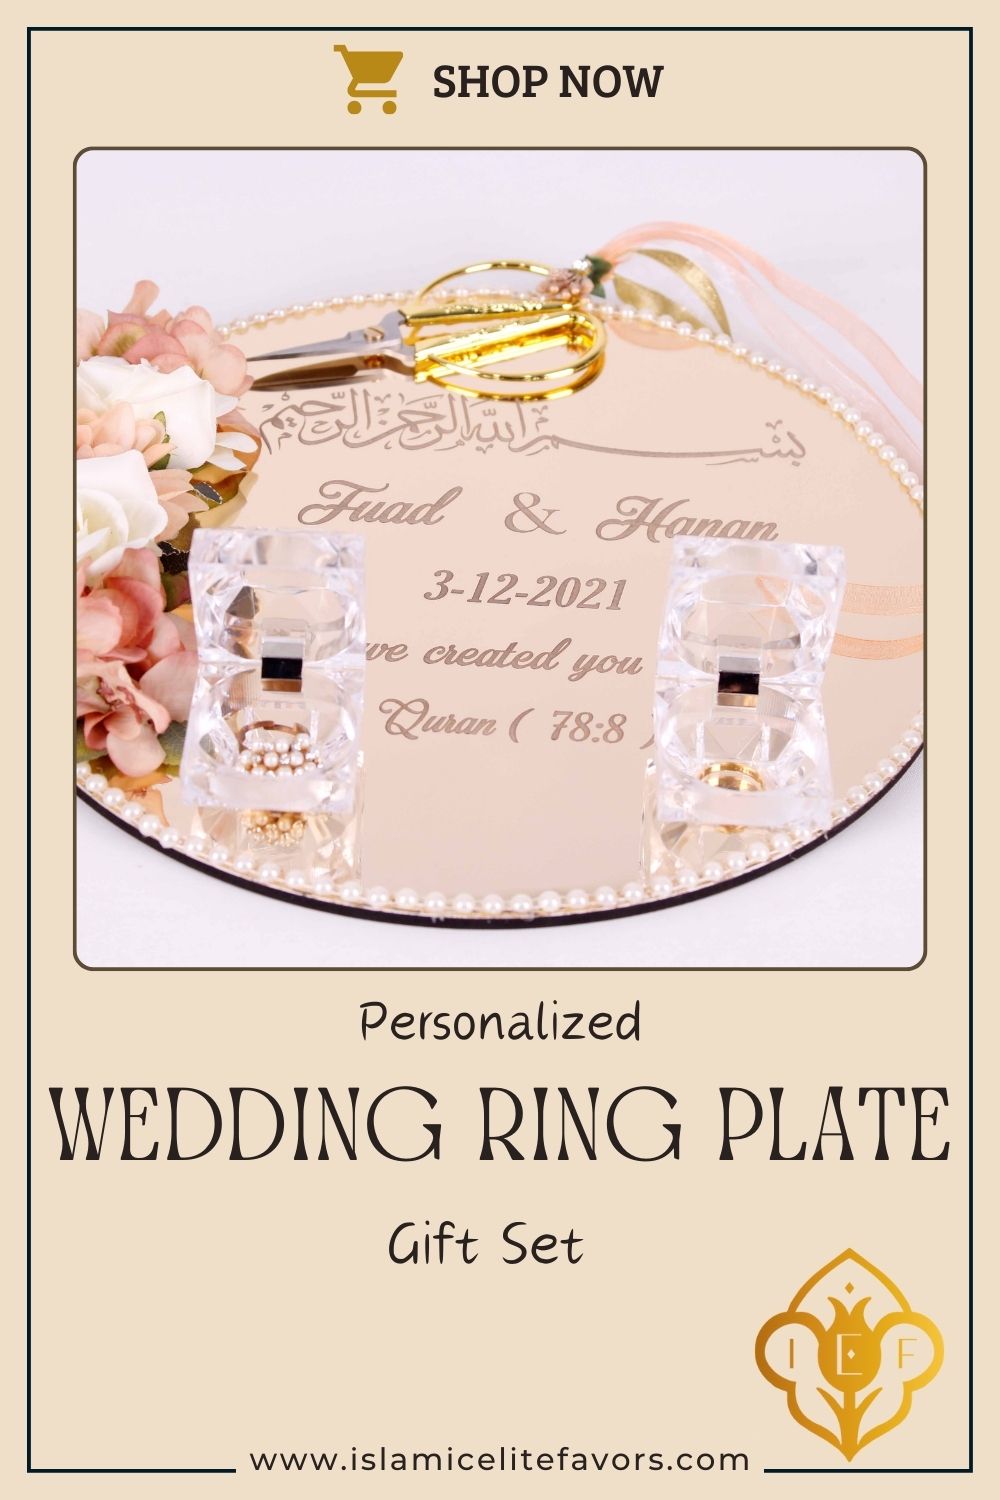 Personalized Wedding Ring Plate Ring Box Scissor Gift Set - Islamic Elite Favors is a handmade gift shop offering a wide variety of unique and personalized gifts for all occasions. Whether you're looking for the perfect Ramadan, Eid, Hajj, wedding gift or something special for a birthday, baby shower or anniversary, we have something for everyone. High quality, made with love.